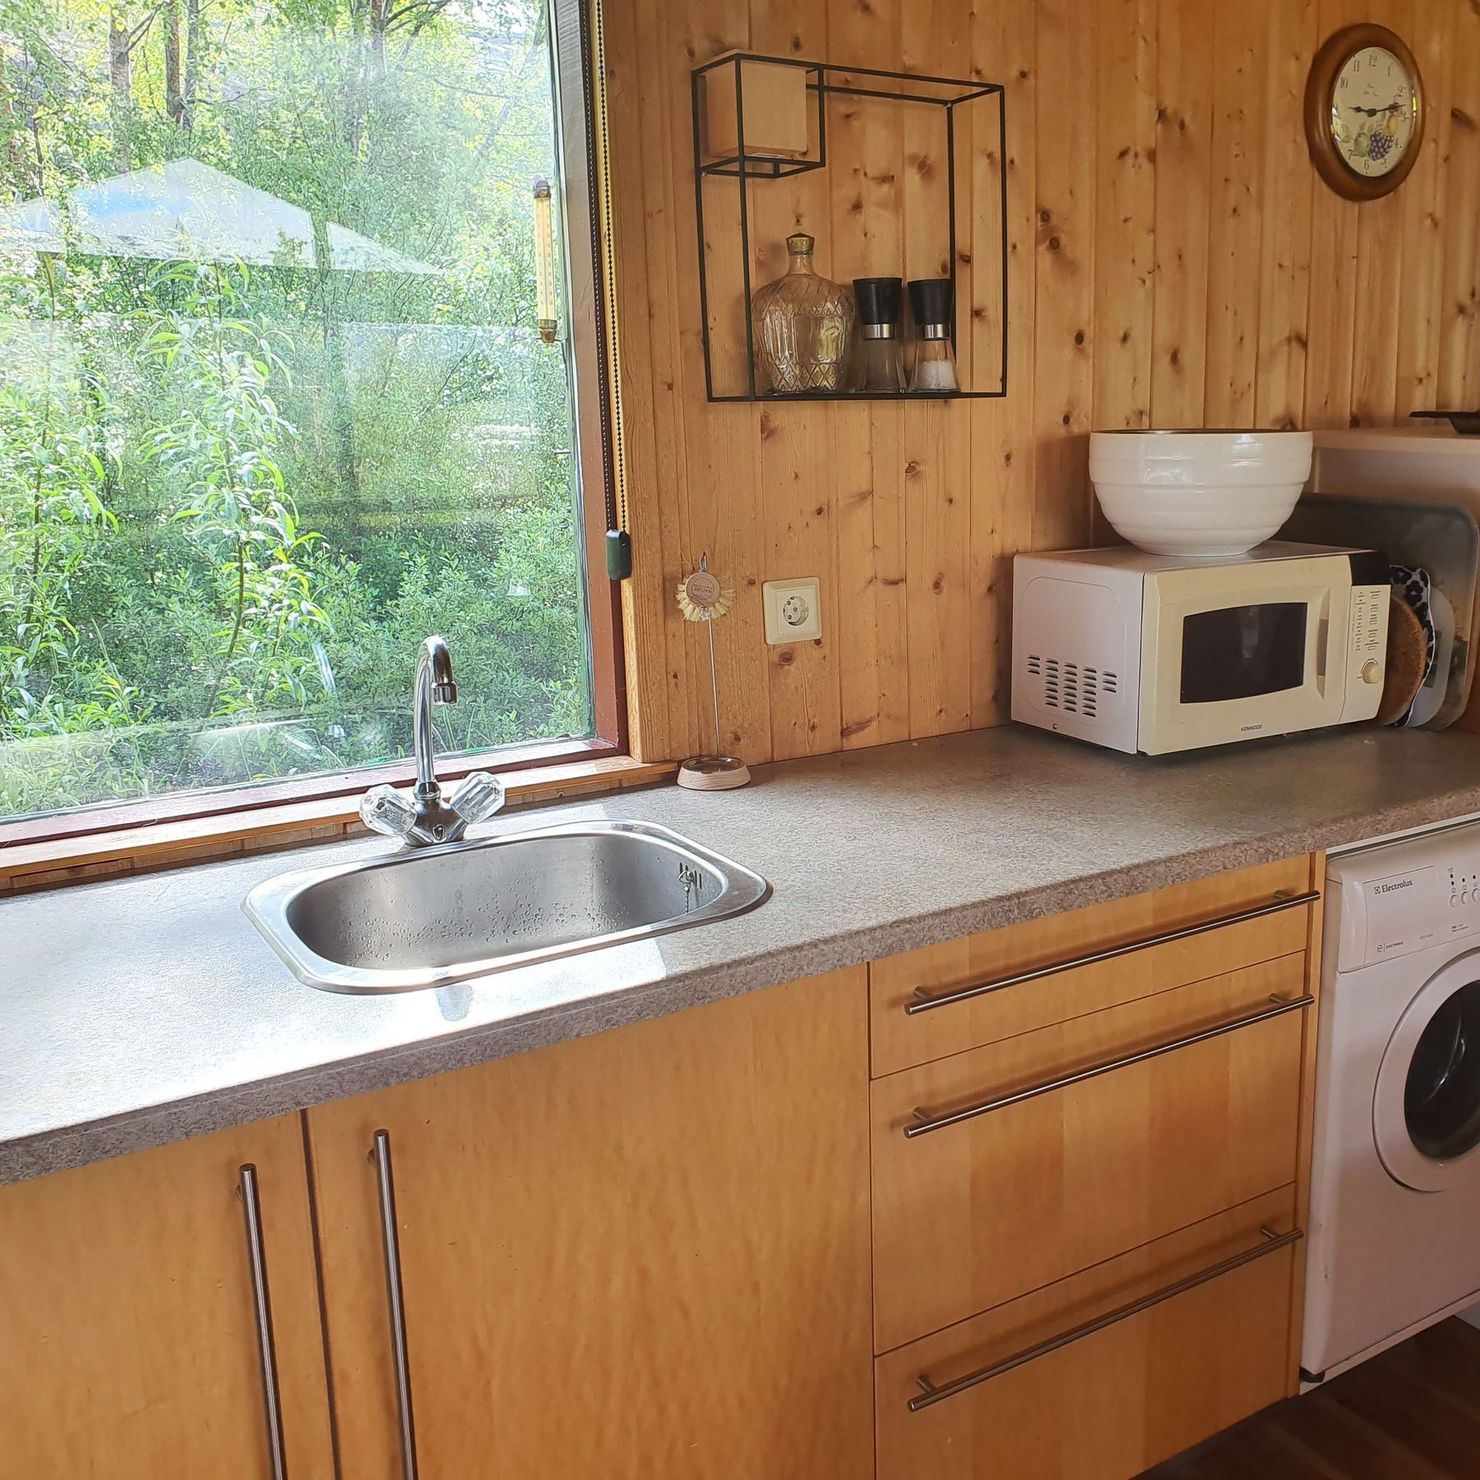 The well-equipped kitchen also has a microwave as well as the washing machine